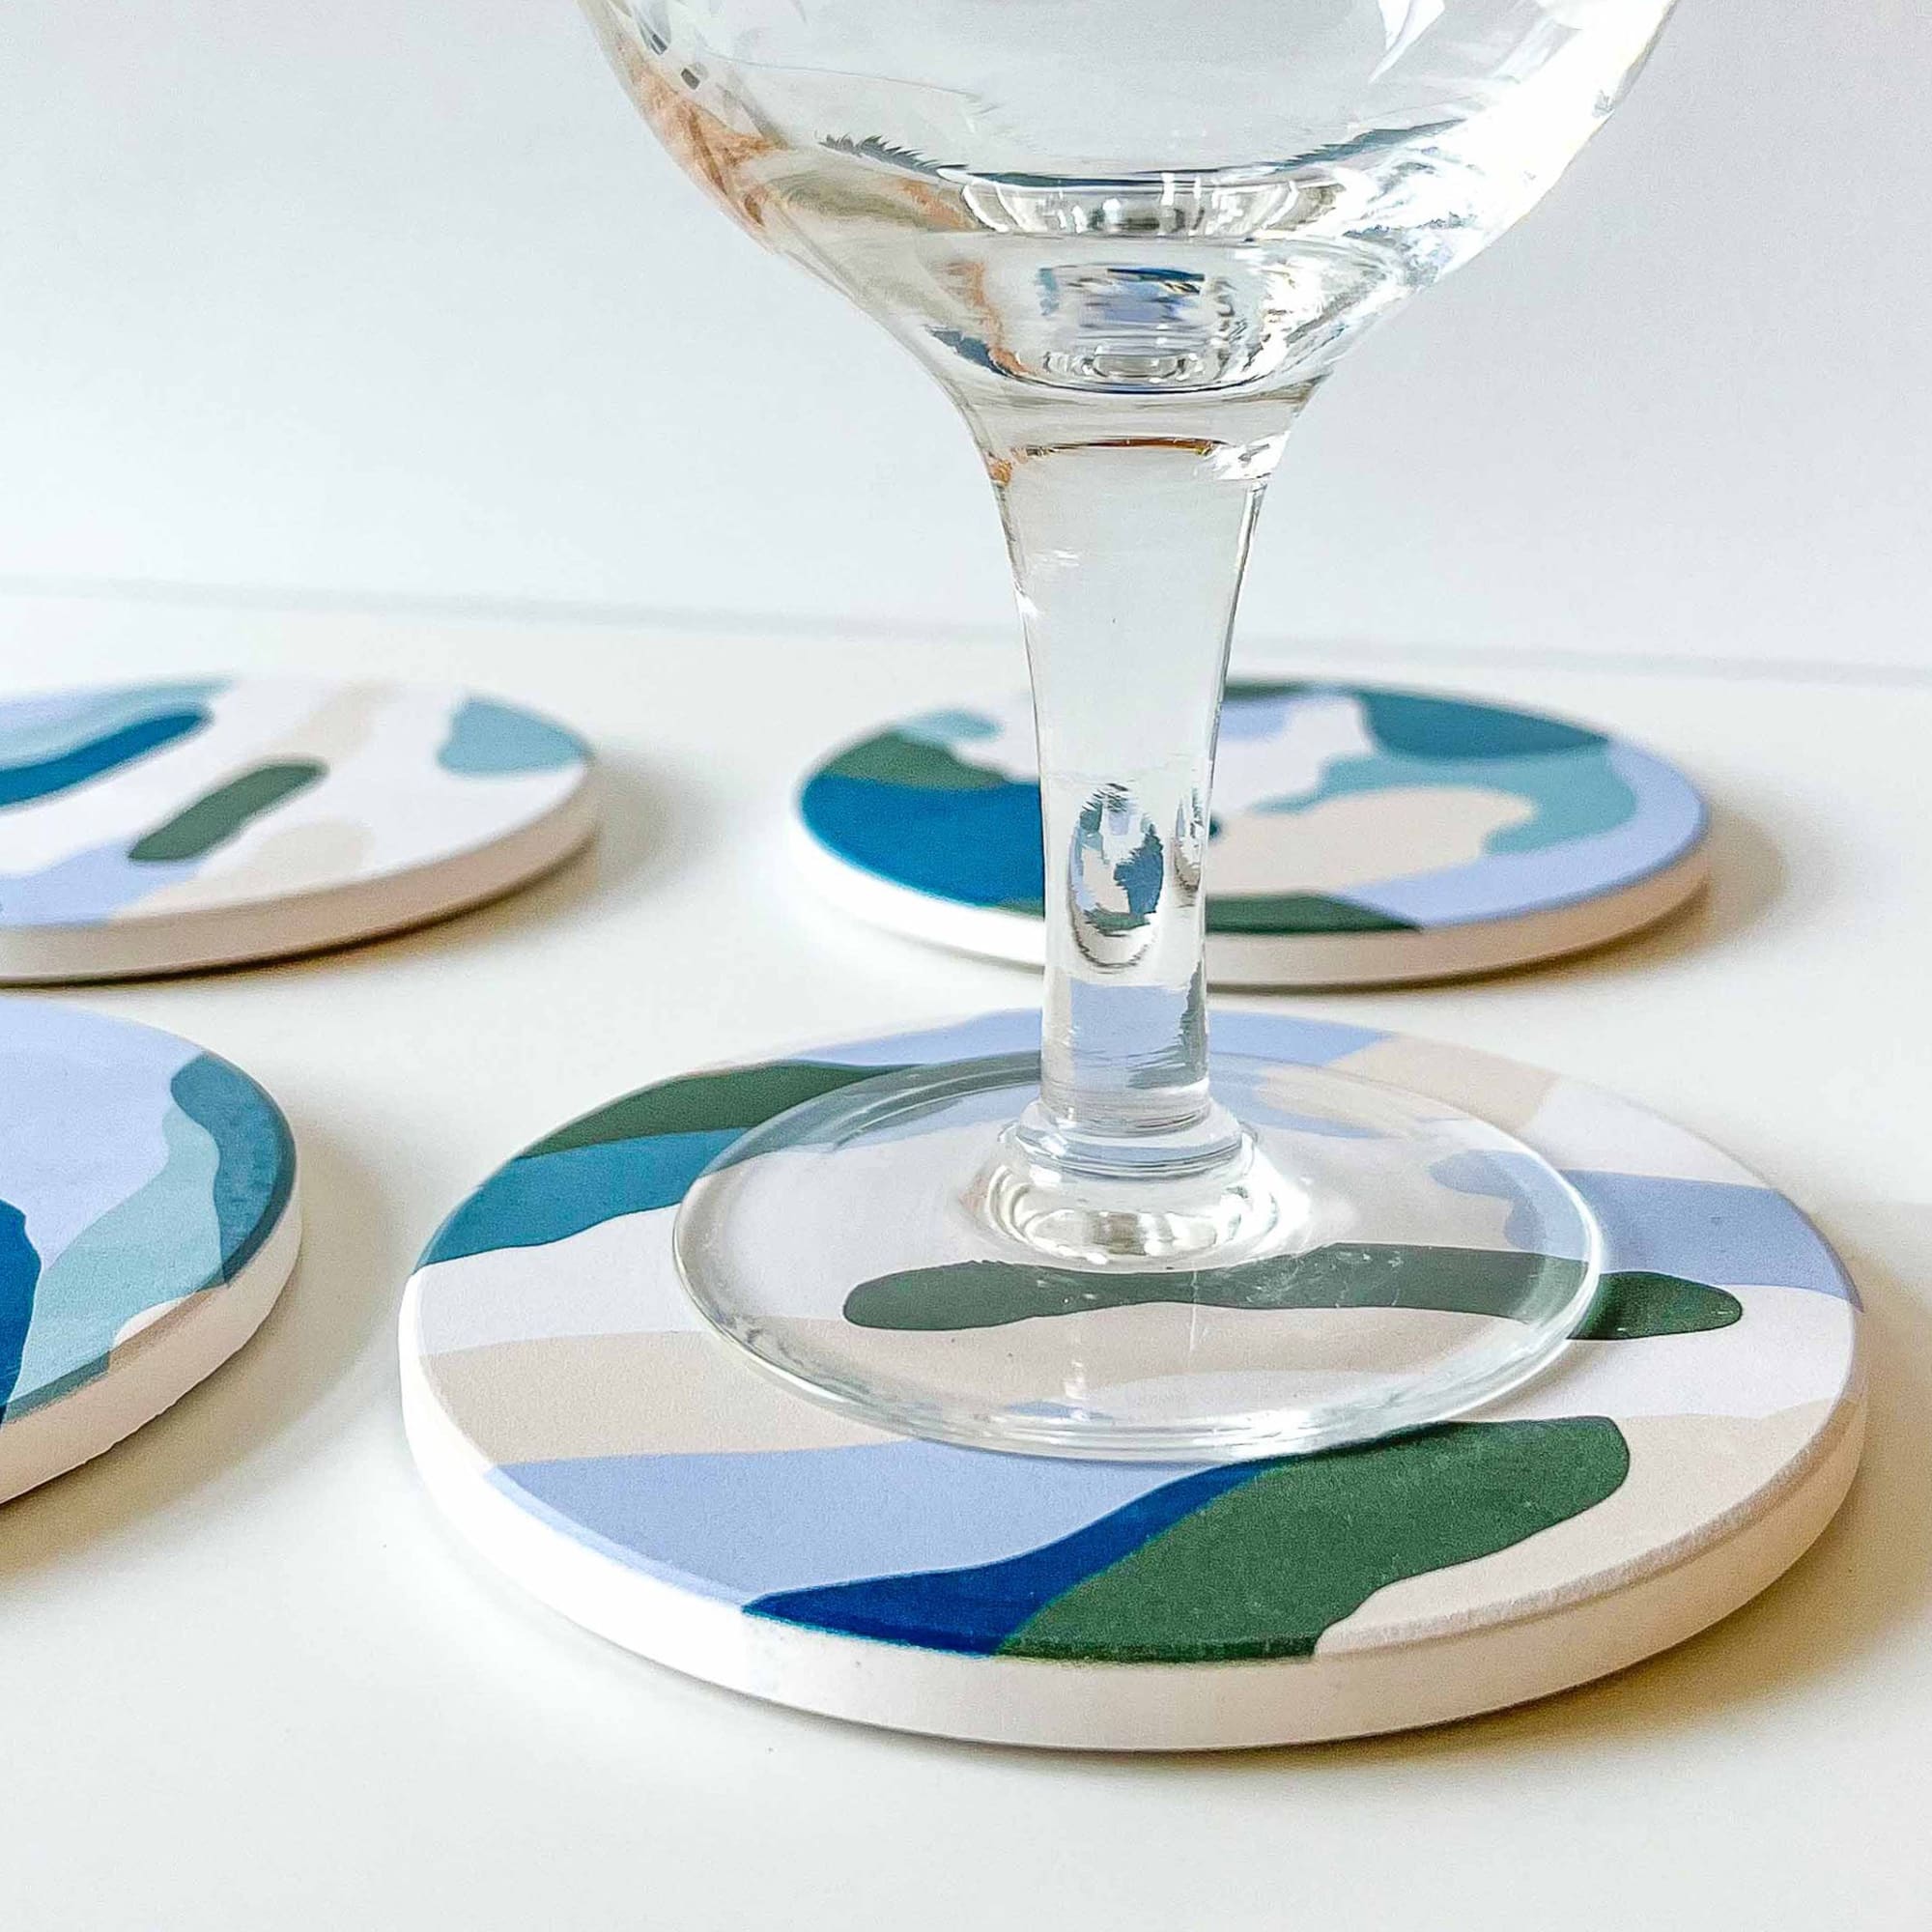 Set of absorbent ceramic coasters with an empty glass on one of them